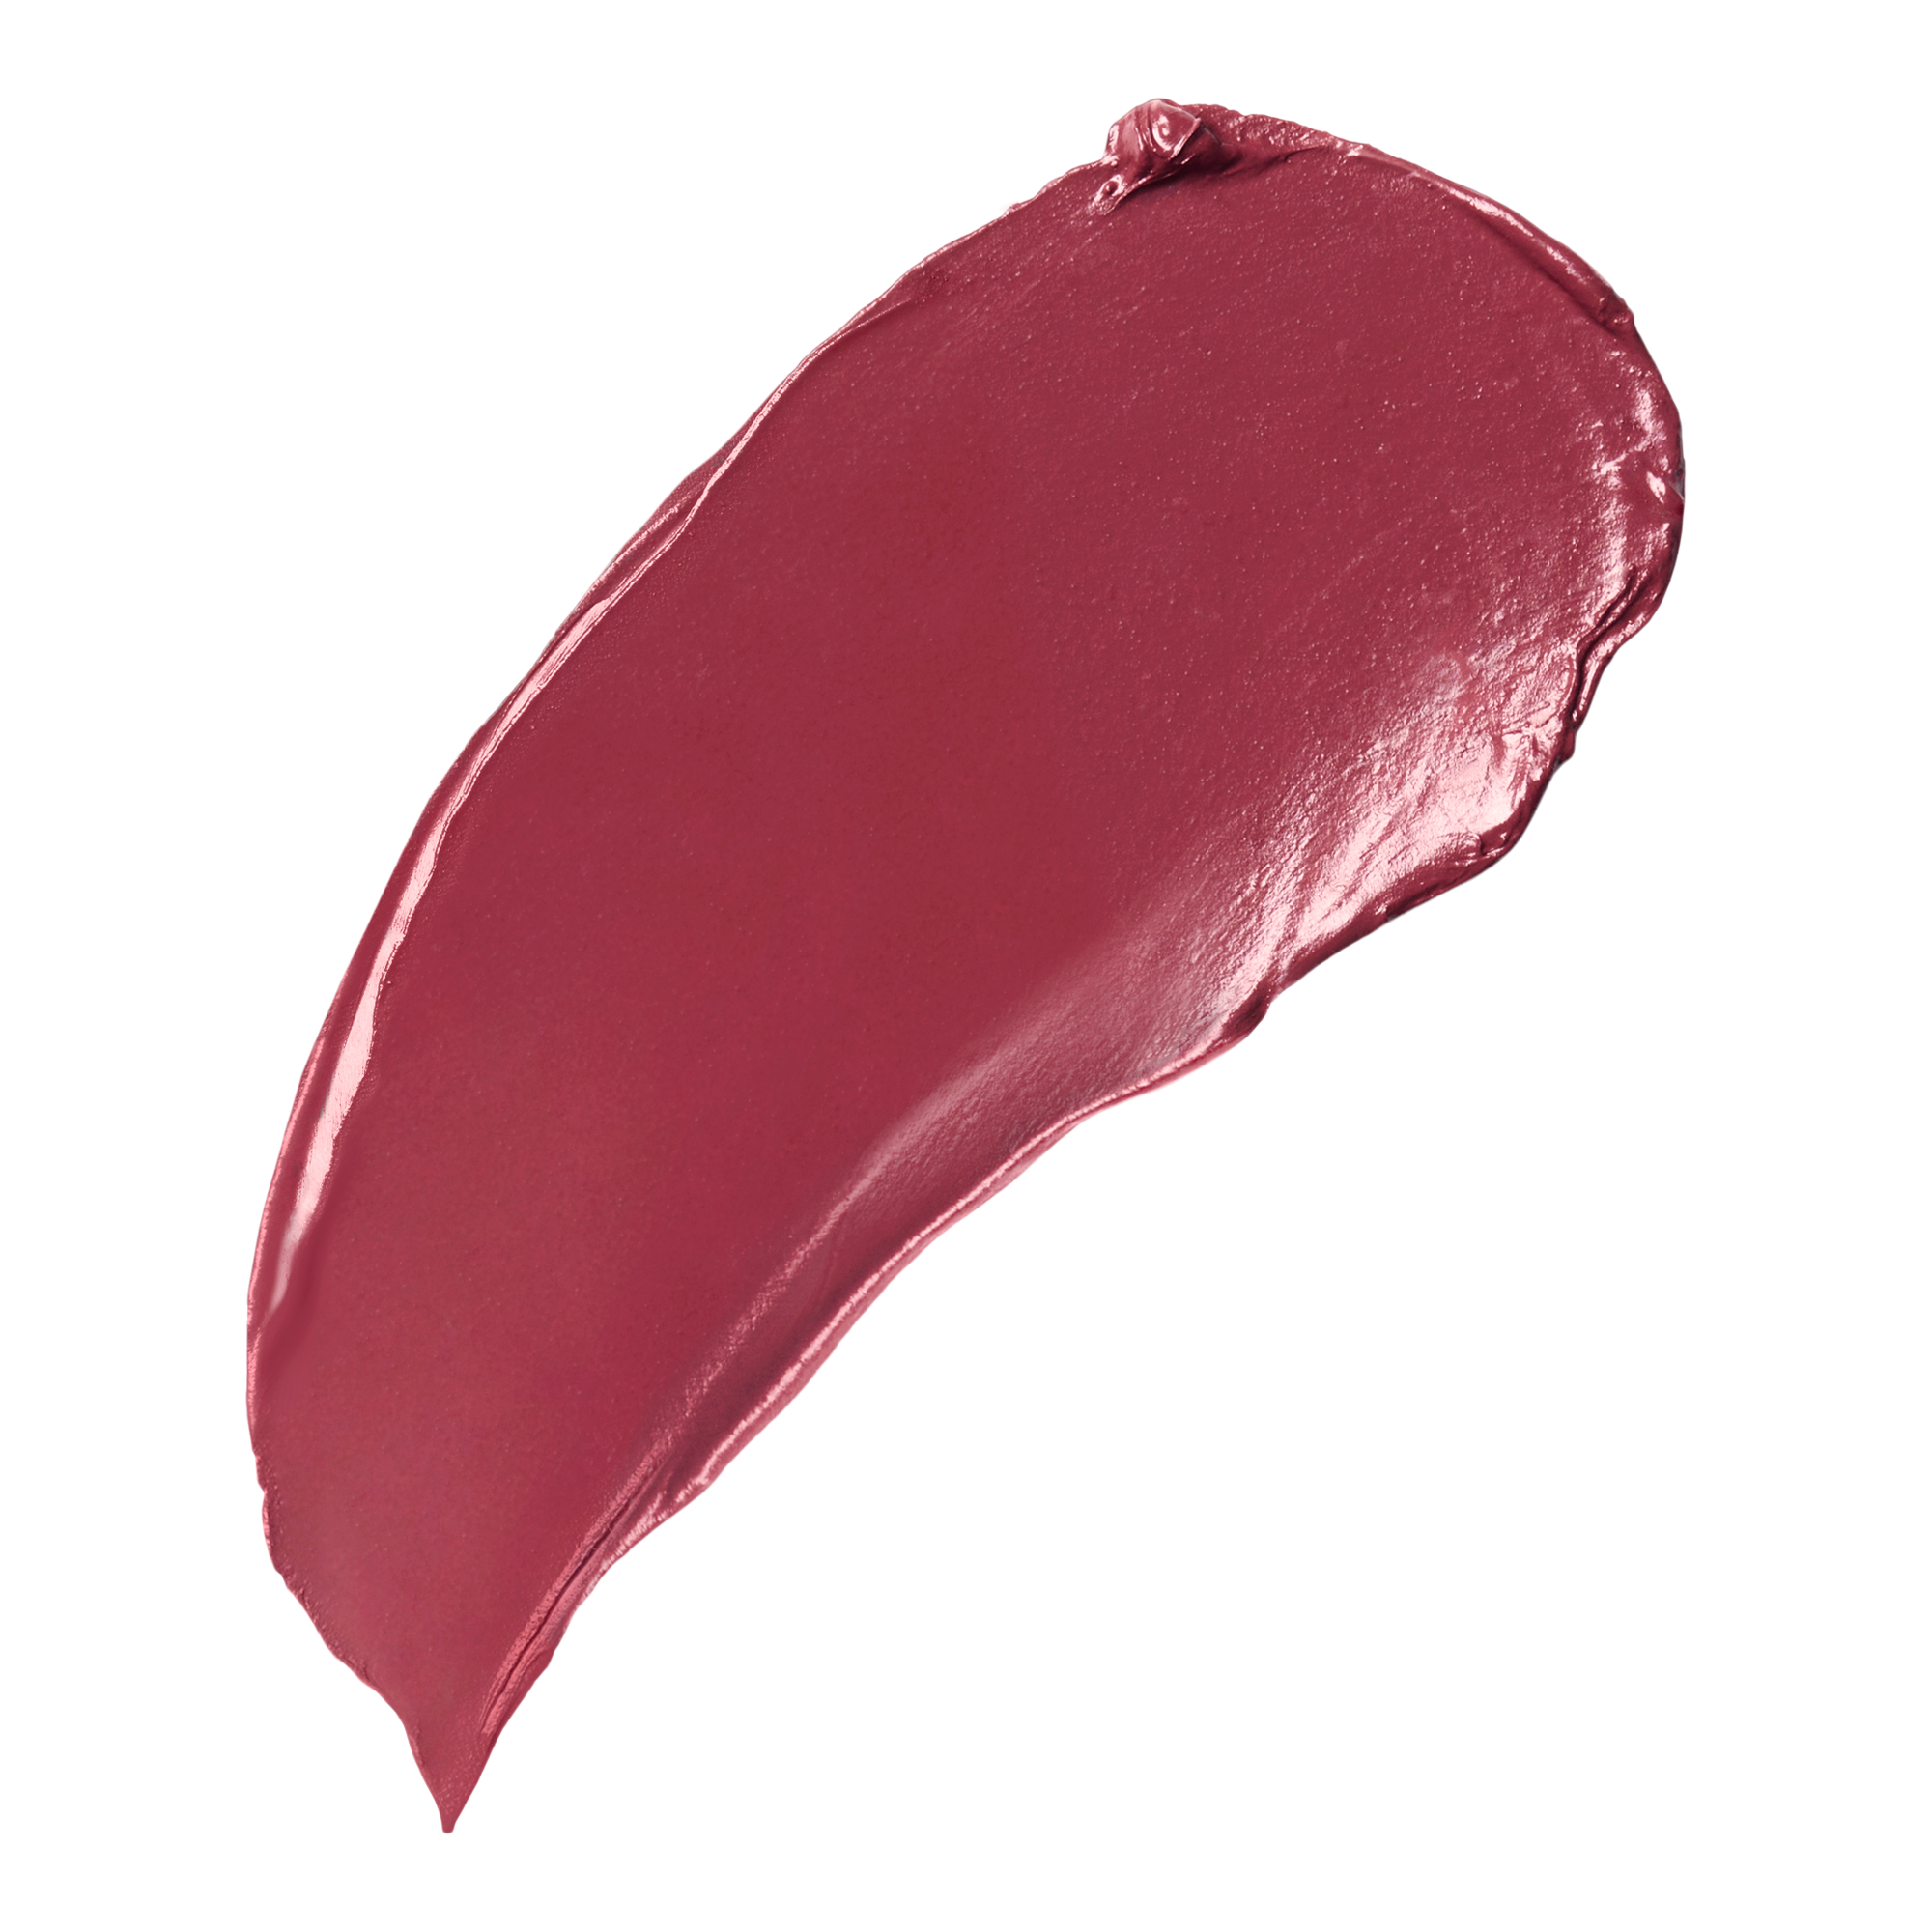 Buxom Full-On Plumping Lipstick Satin / Dolly Doll / Swatch